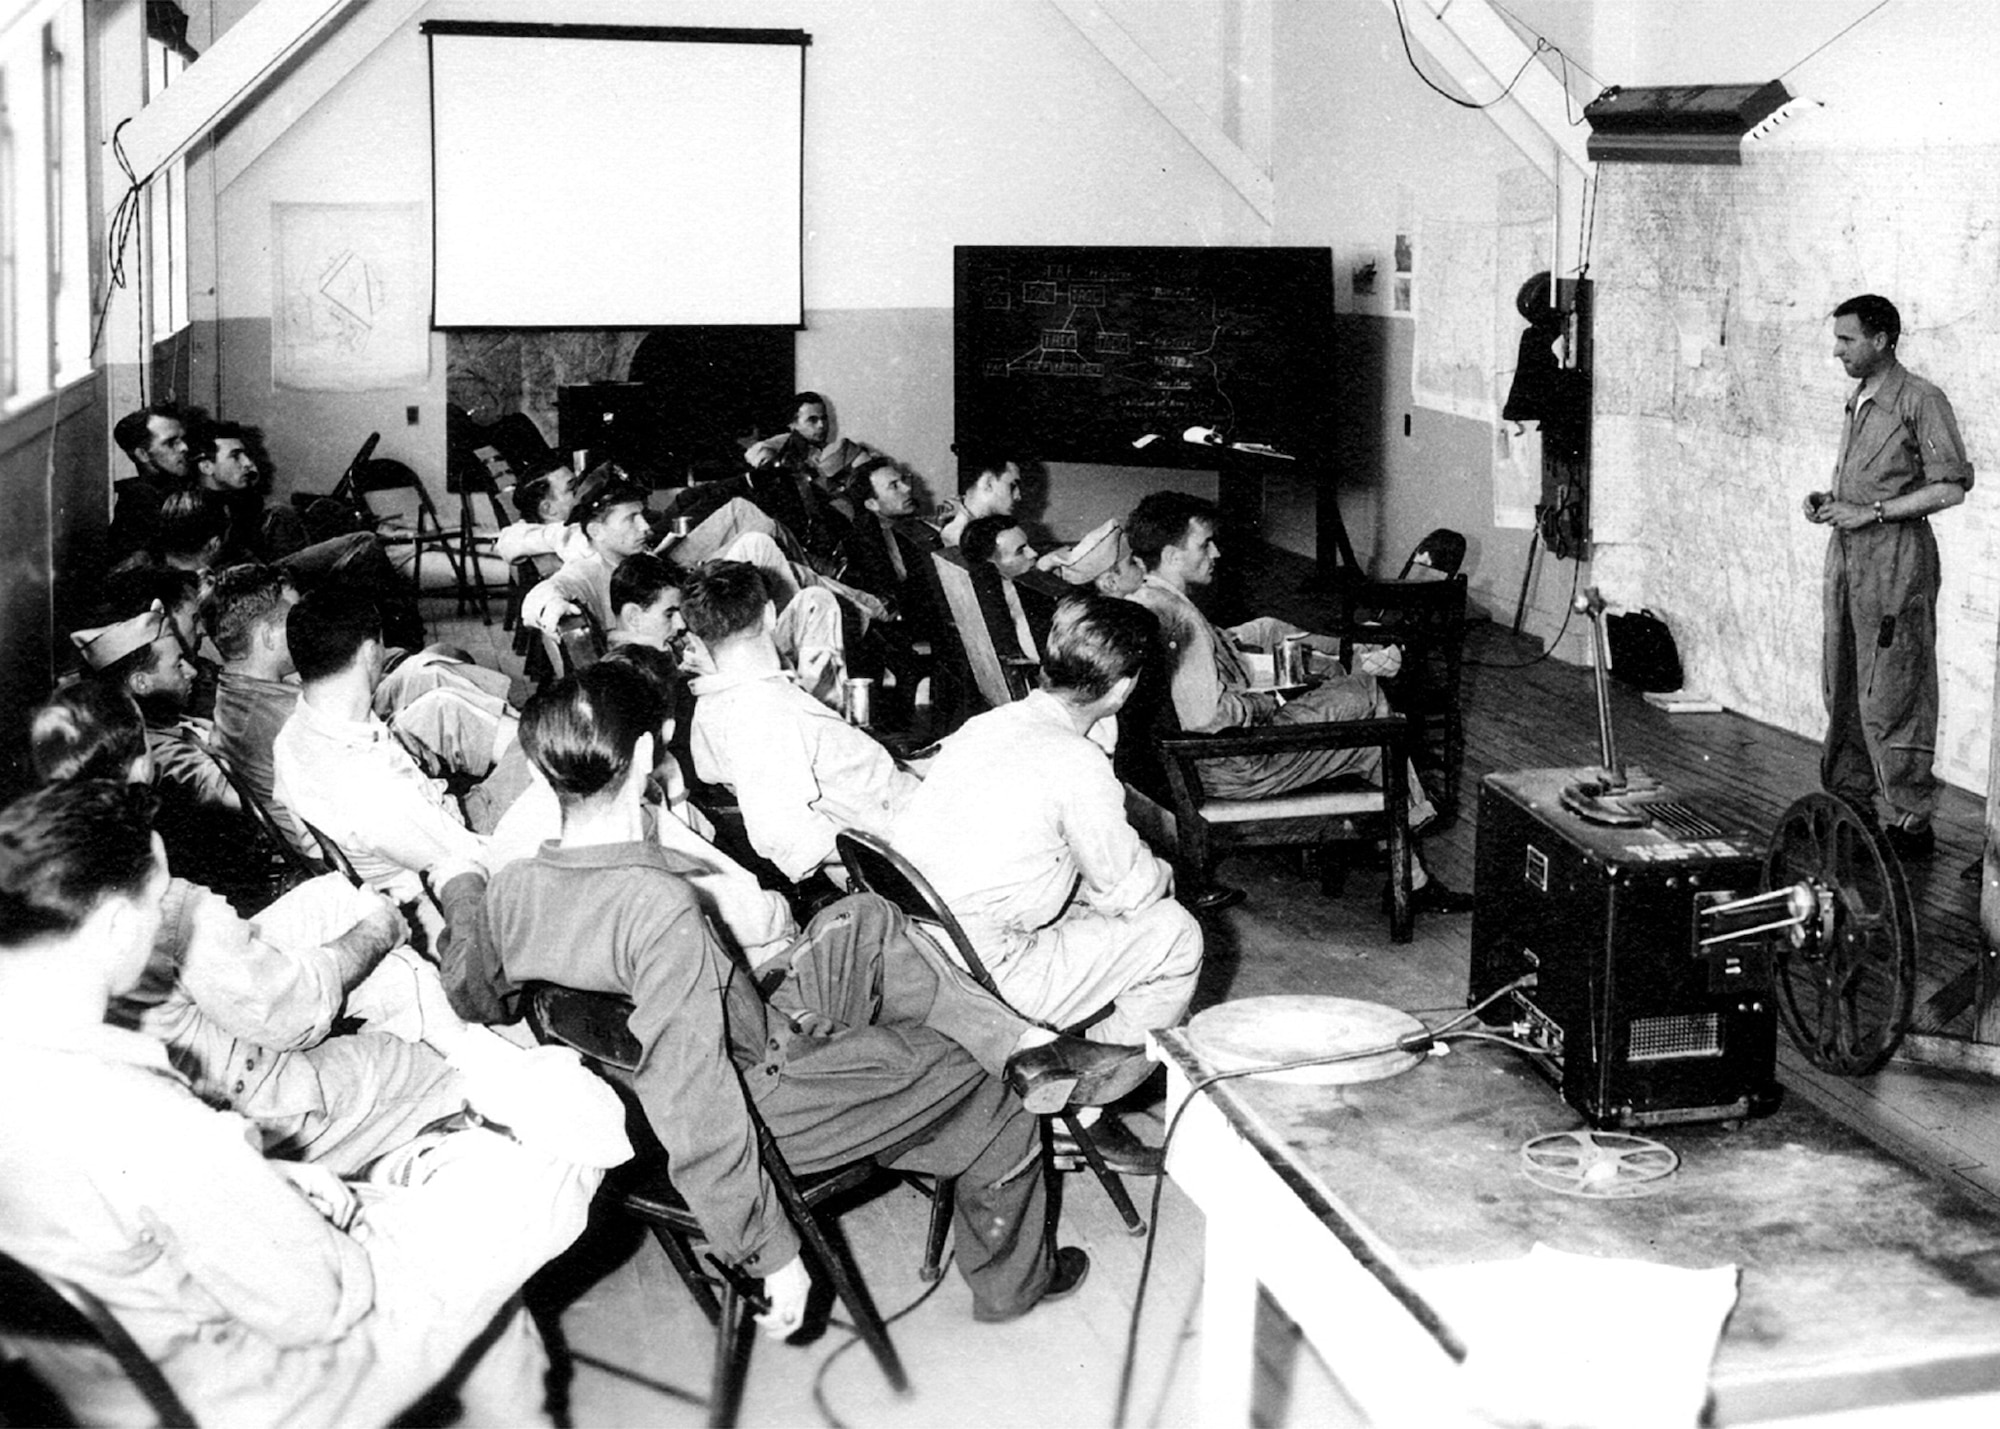 Lt.Col. Barnie McEntire conducts a briefing, late 1940s